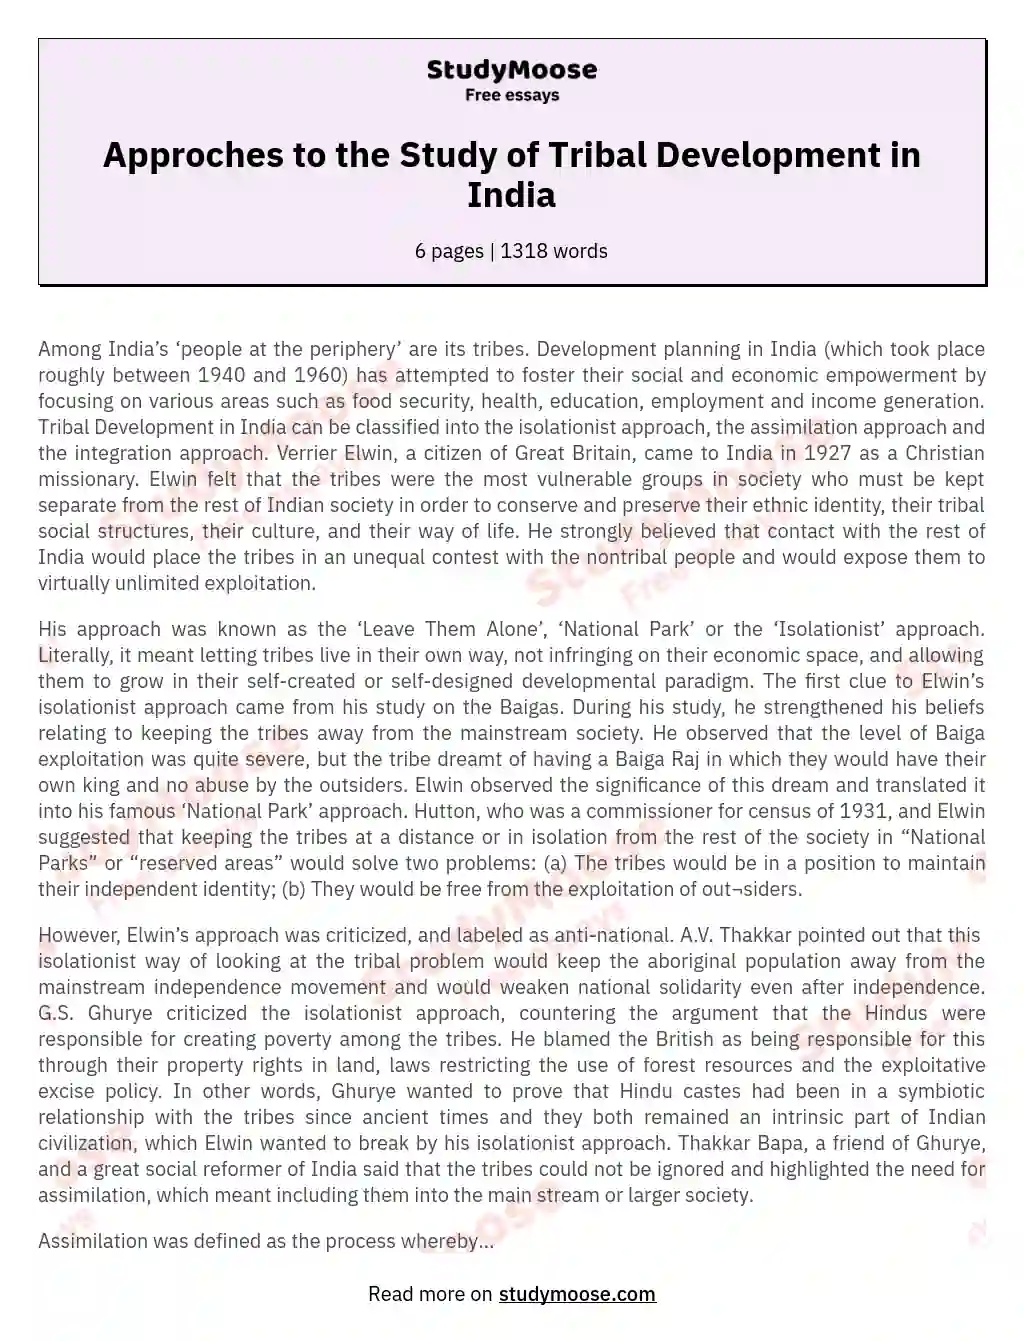 Approches to the Study of Tribal Development in India essay